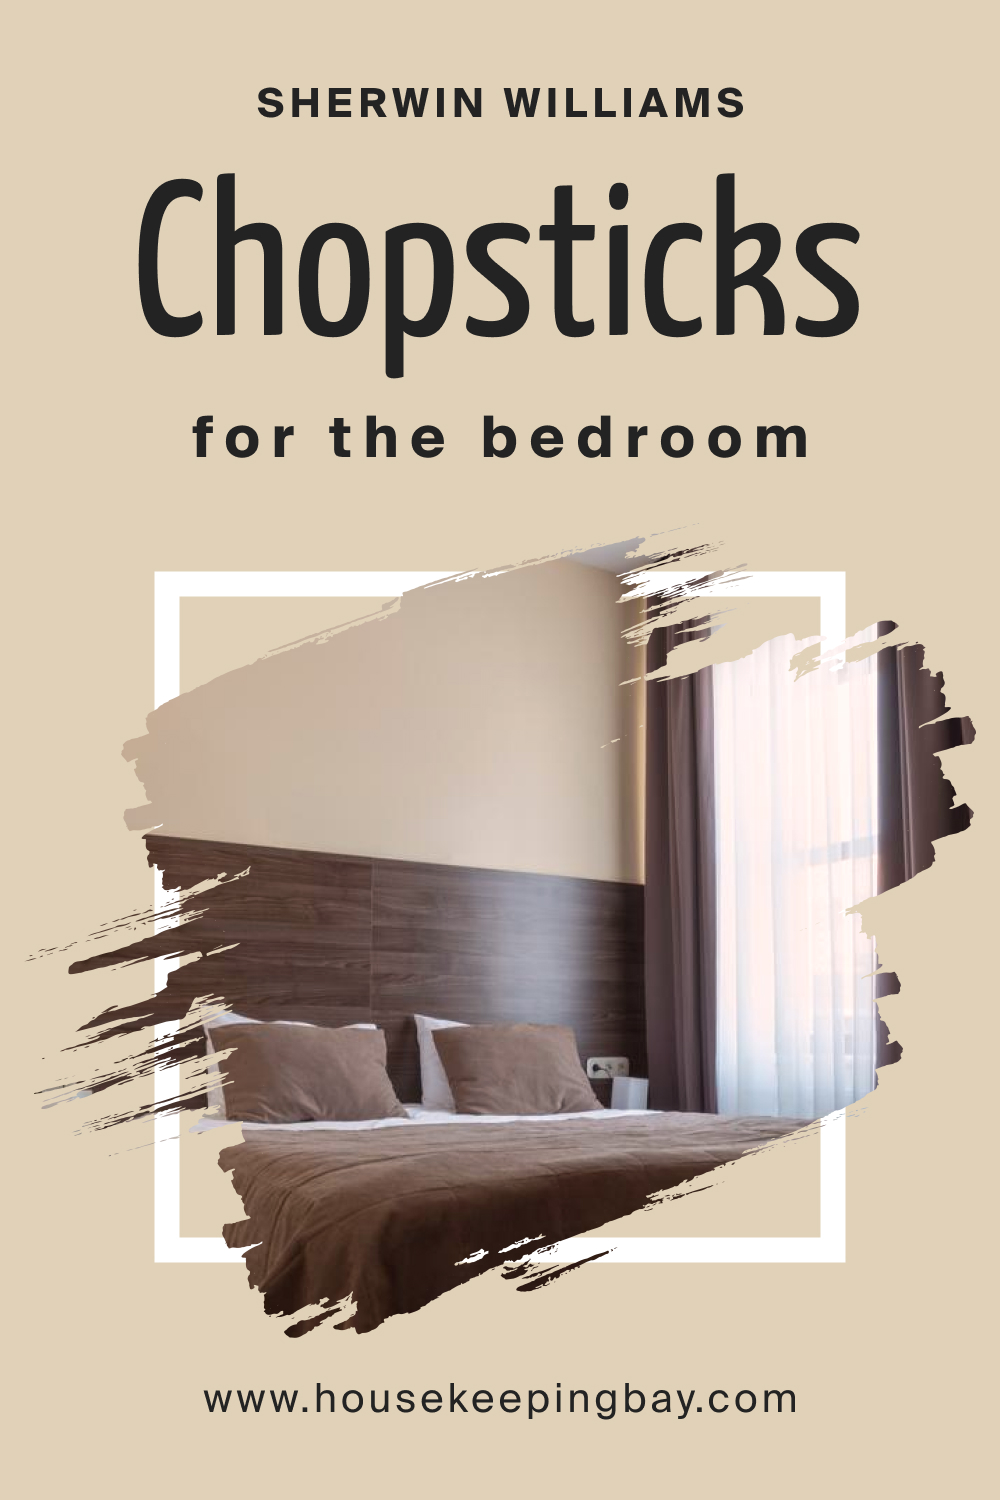 Sherwin Williams. SW Chopsticks For the bedroom